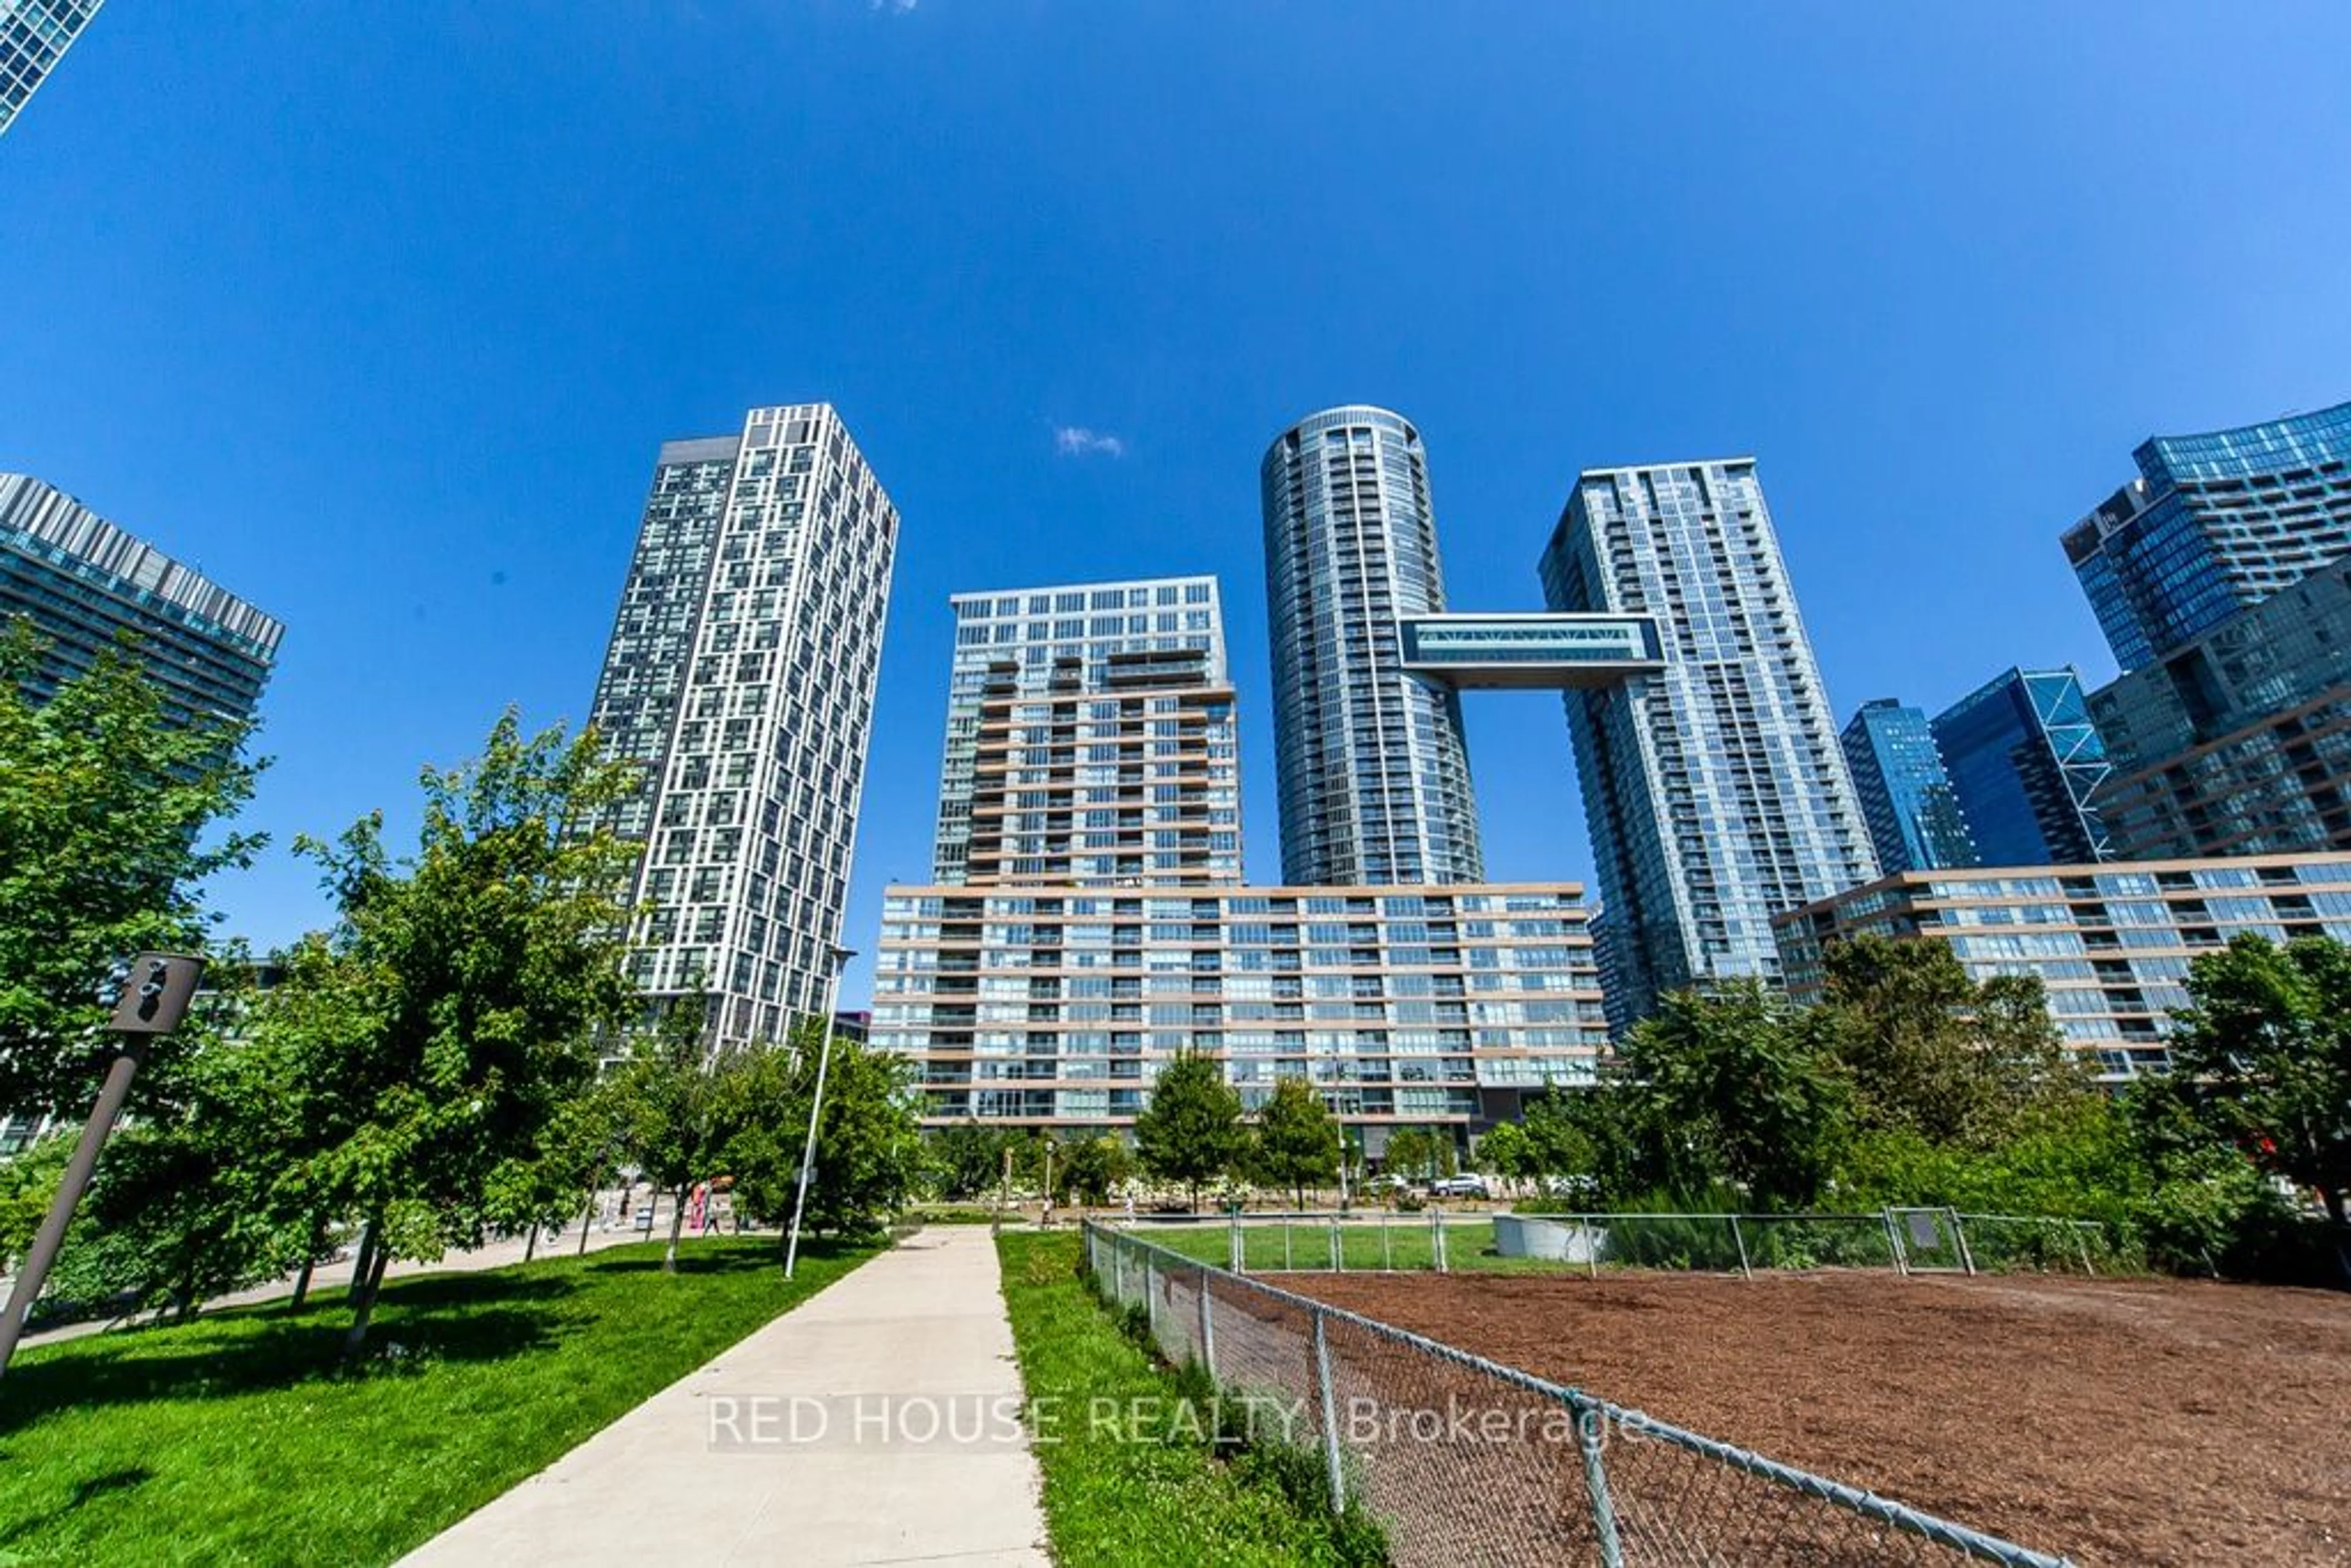 A pic from exterior of the house or condo for 151 Dan Leckie Way #1052, Toronto Ontario M5V 4B2